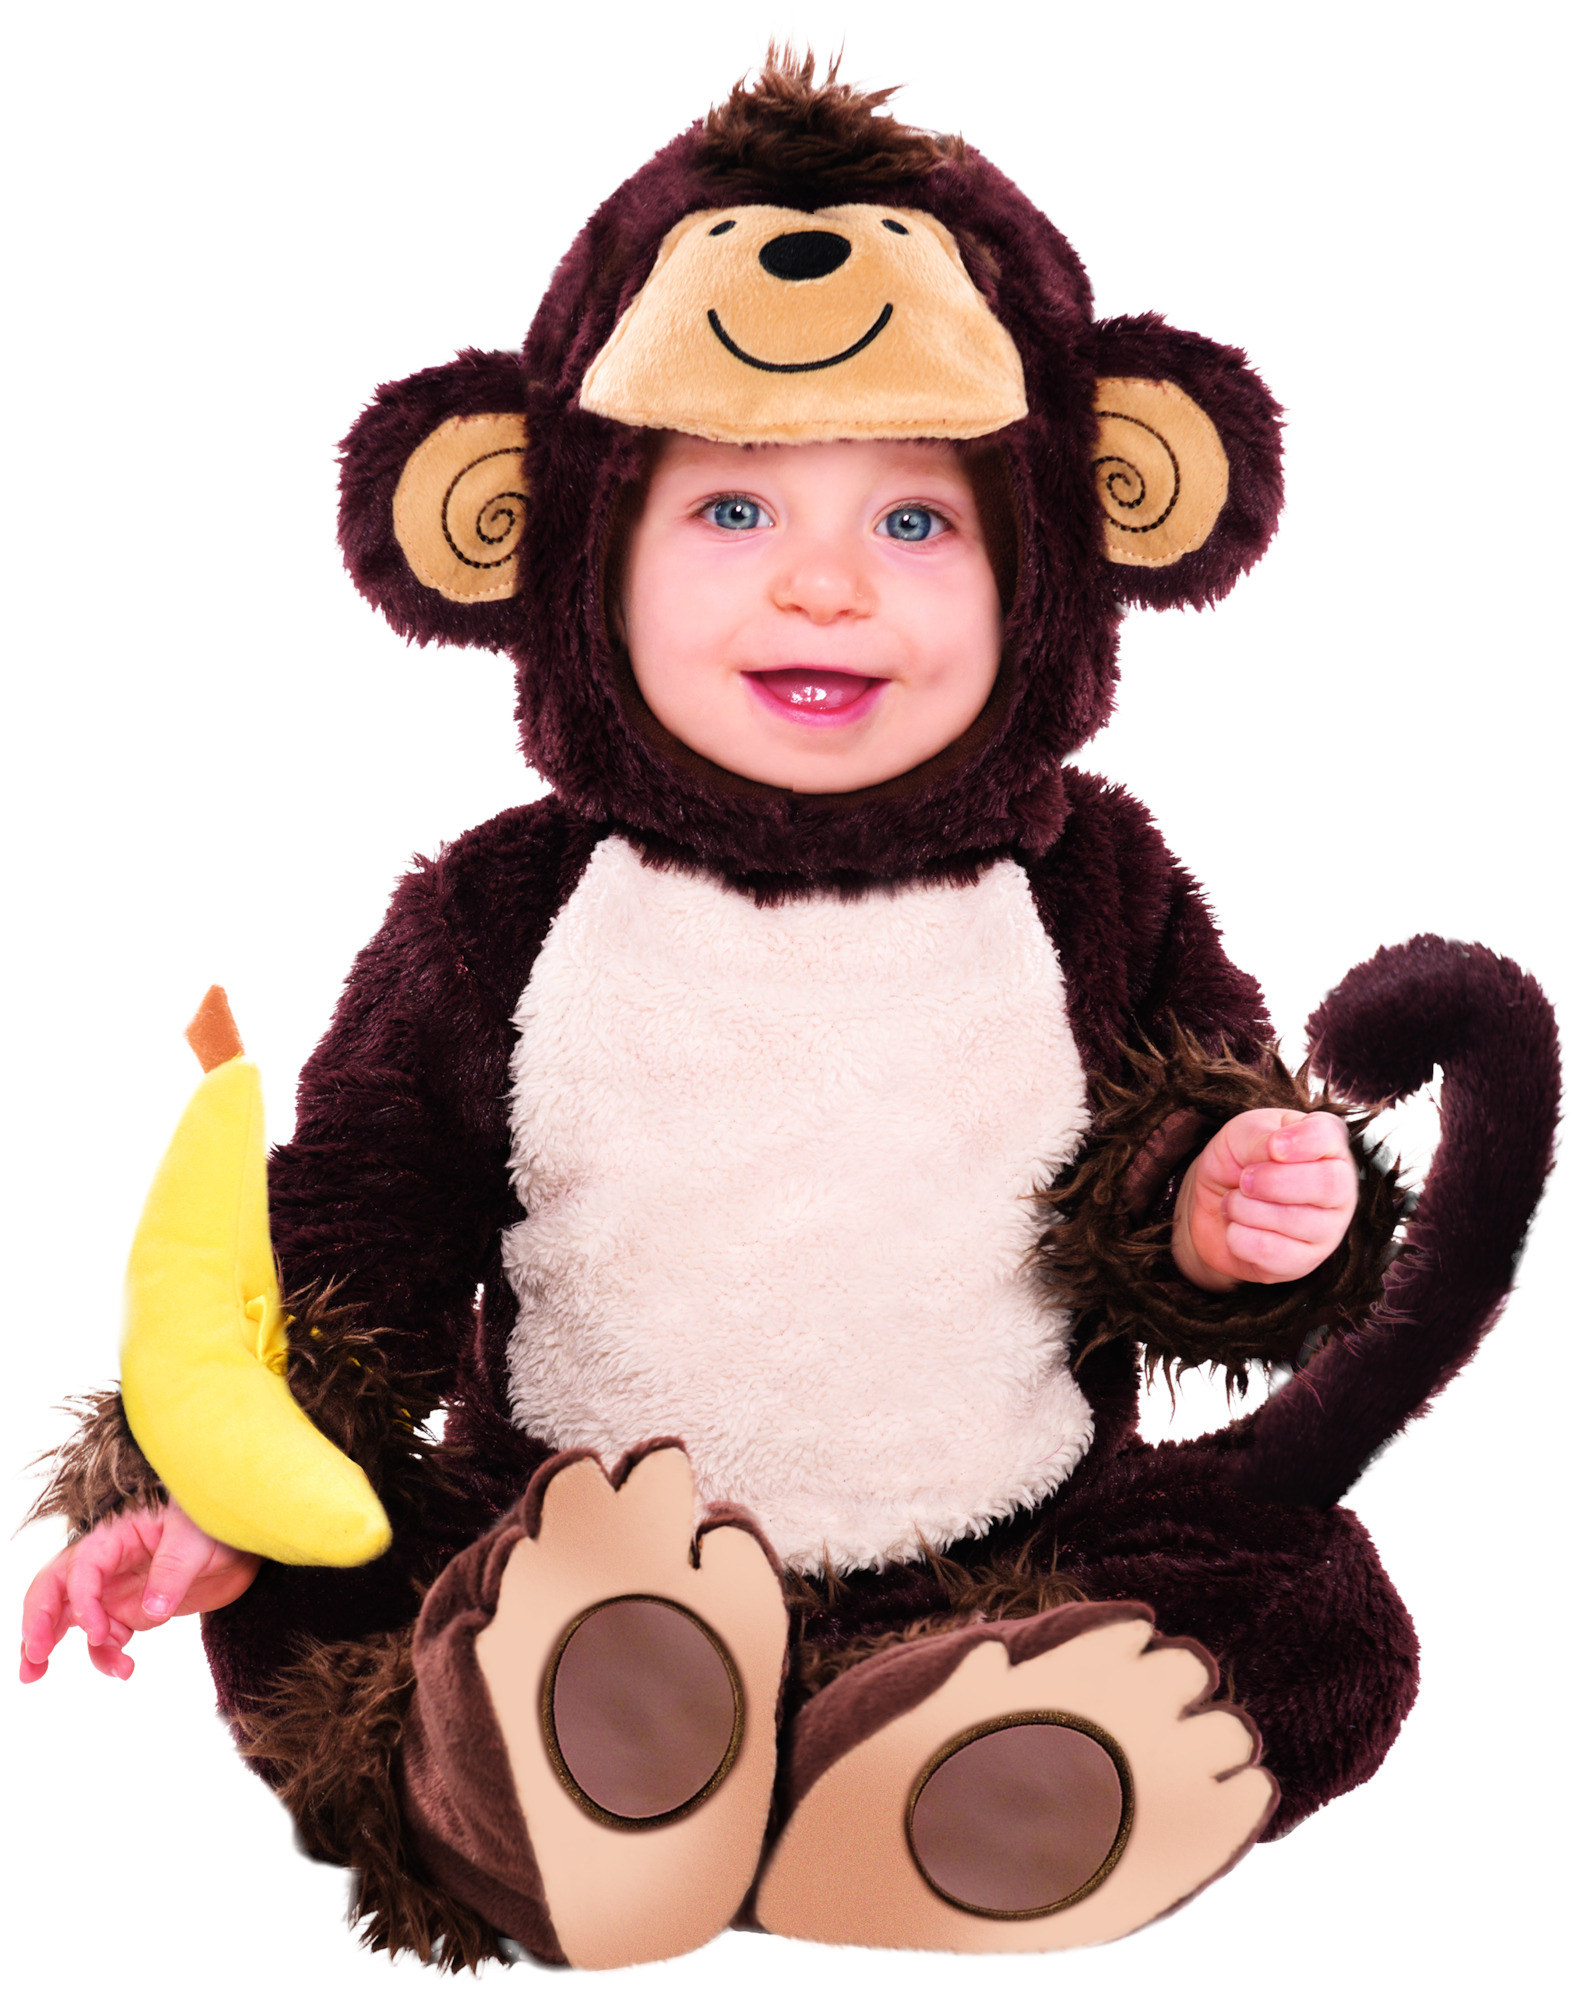 baby in monkey costume holding a banana